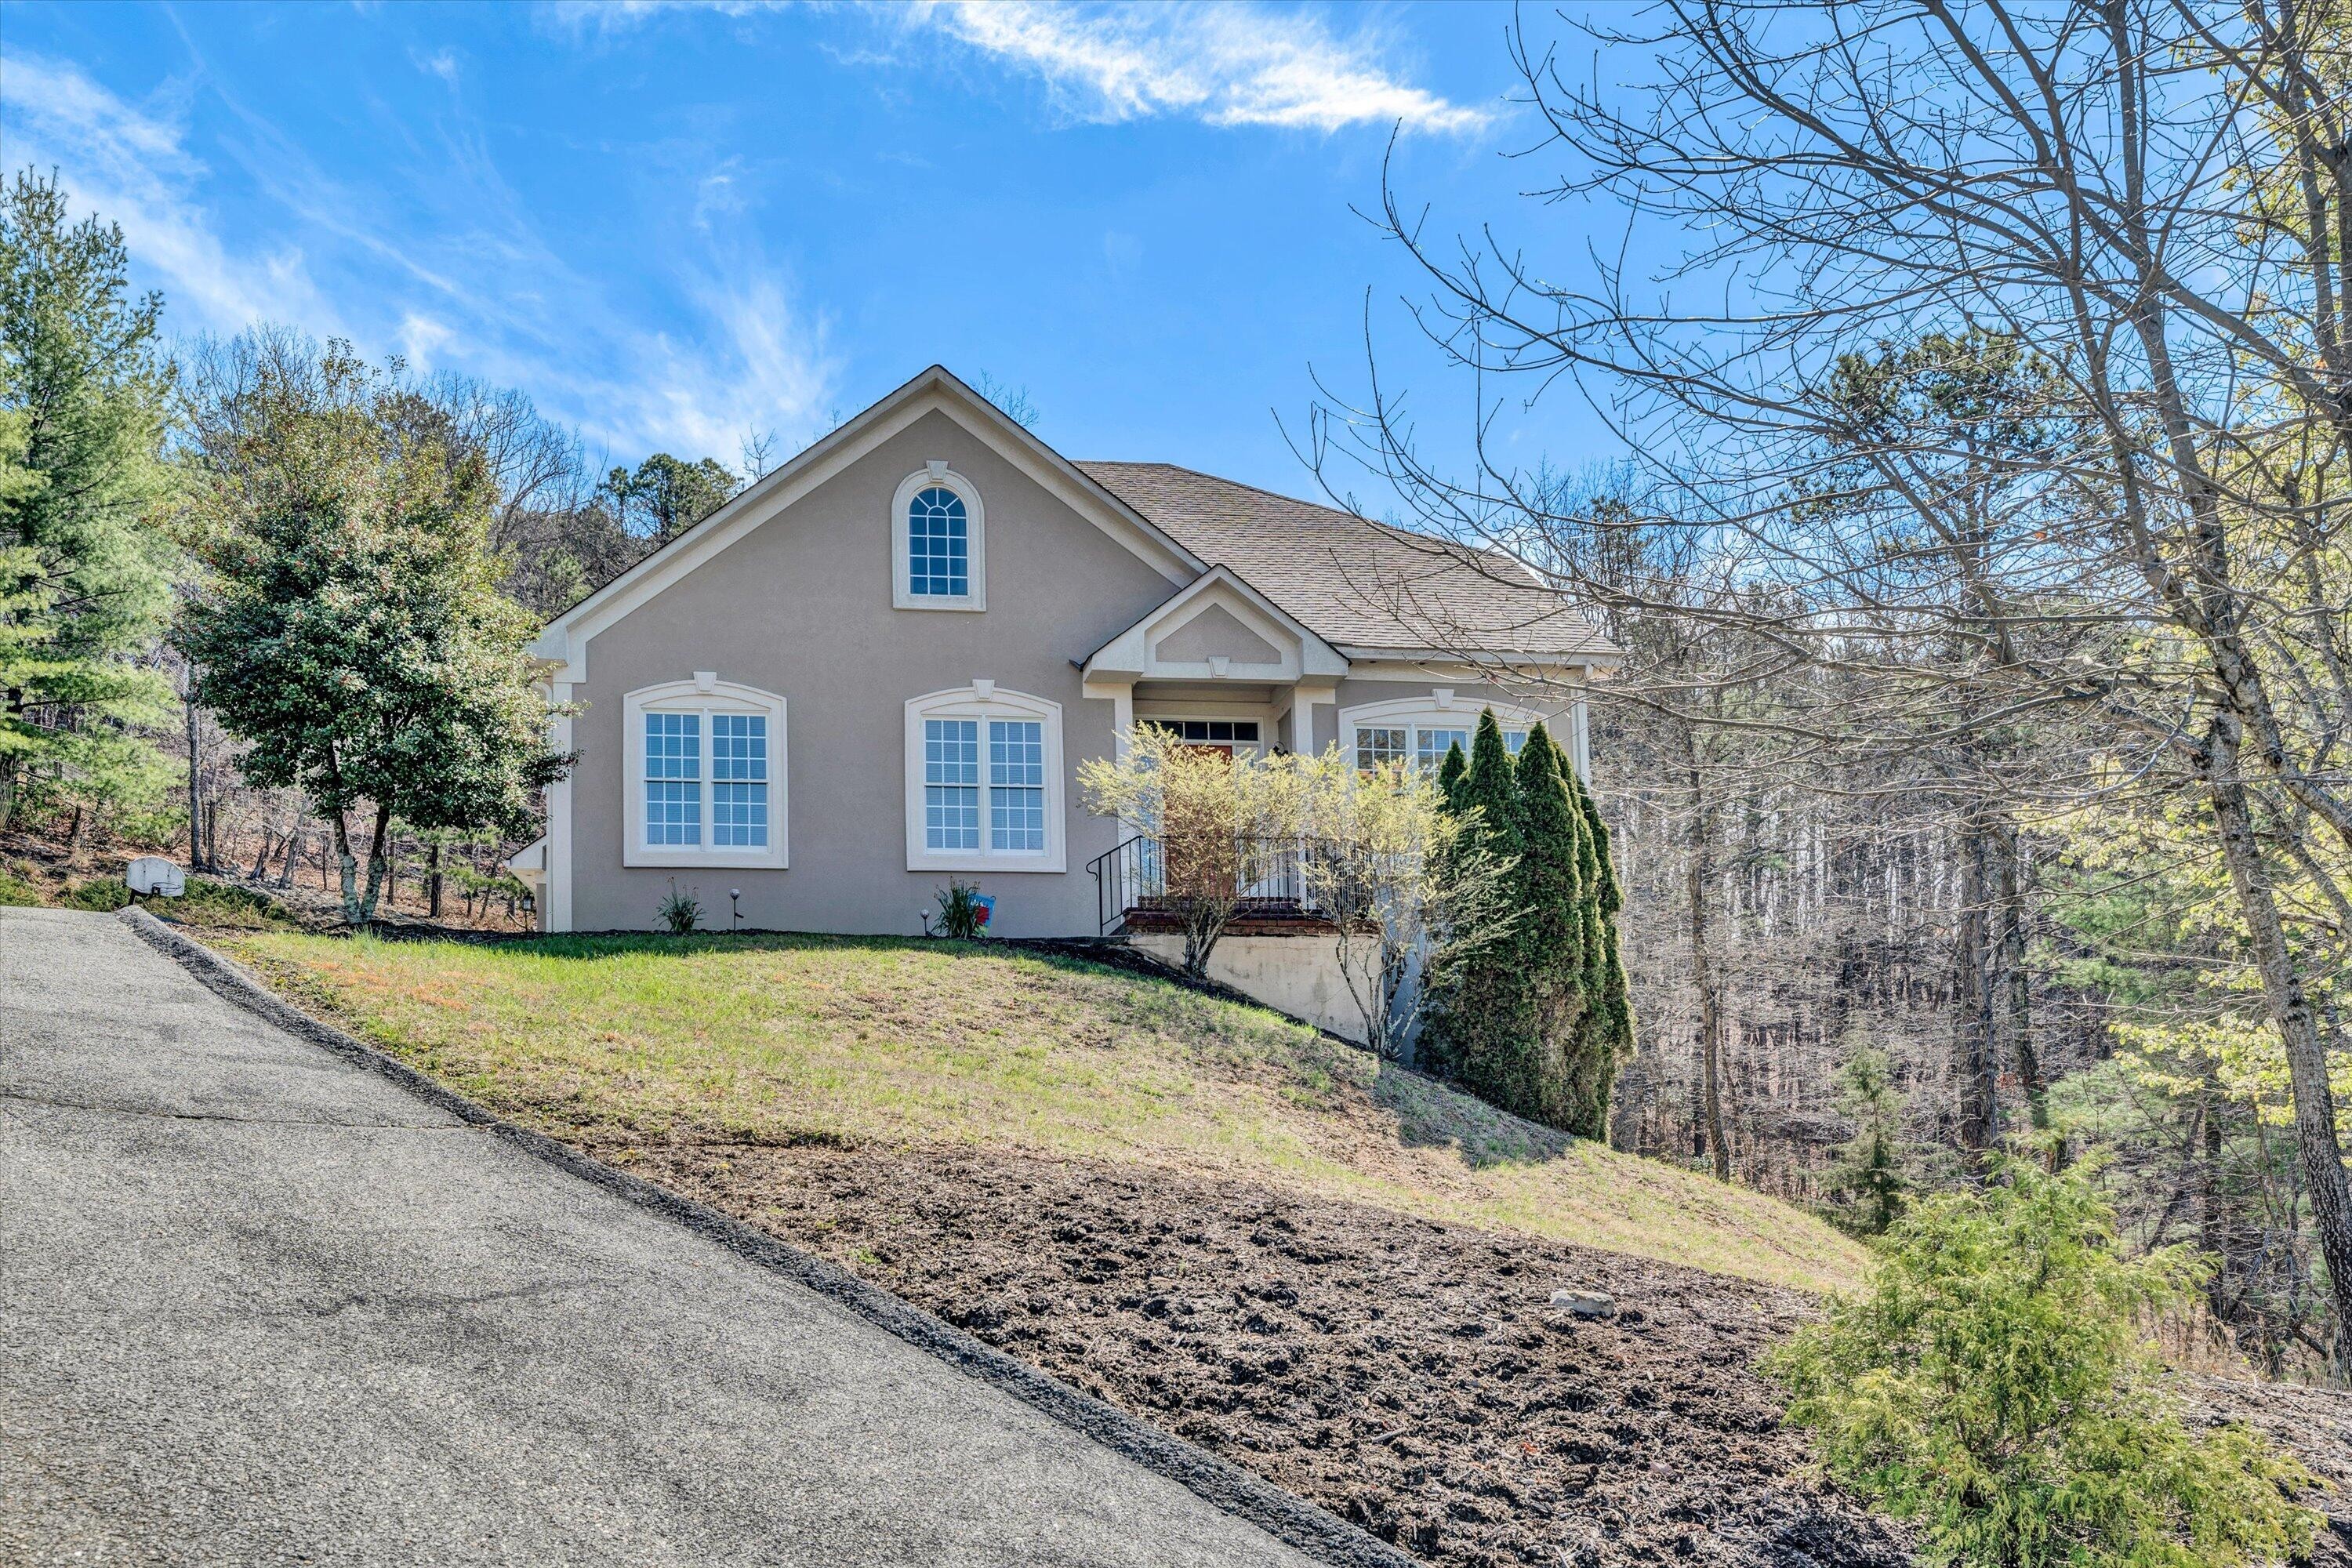 2. 4059 Overlook Trail Dr